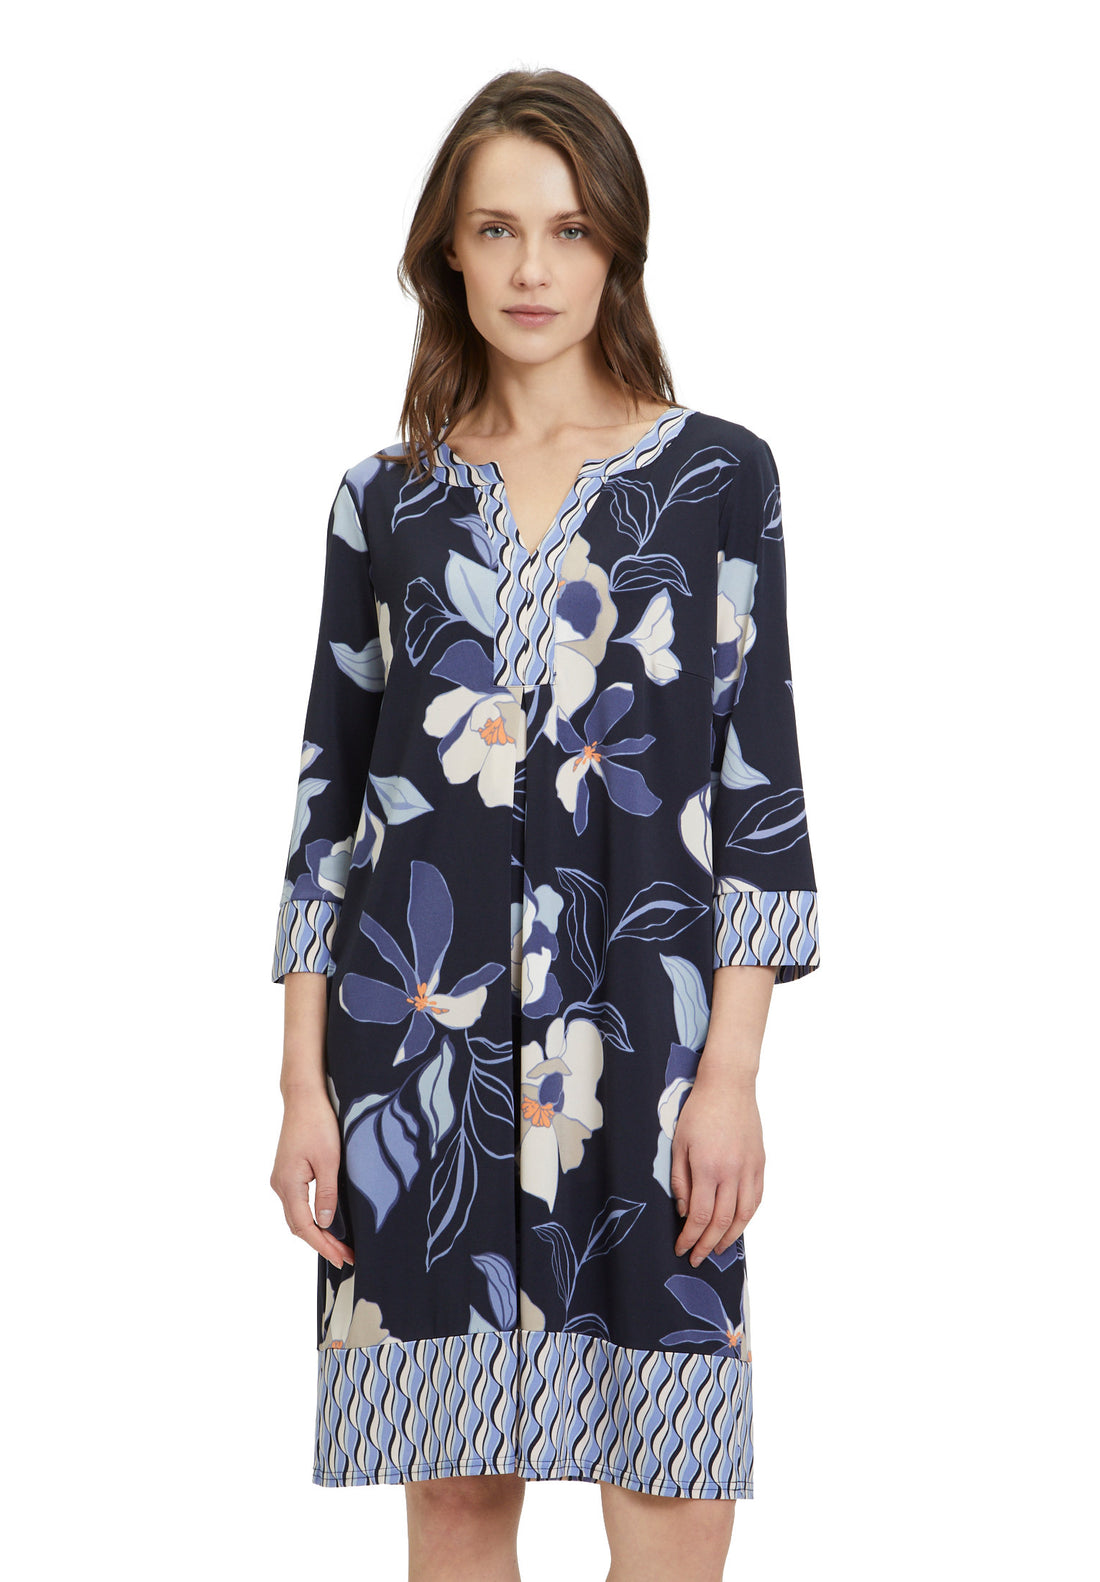 Printed Casual Dress With 3/4 Sleeves_1524 2479_8811_03